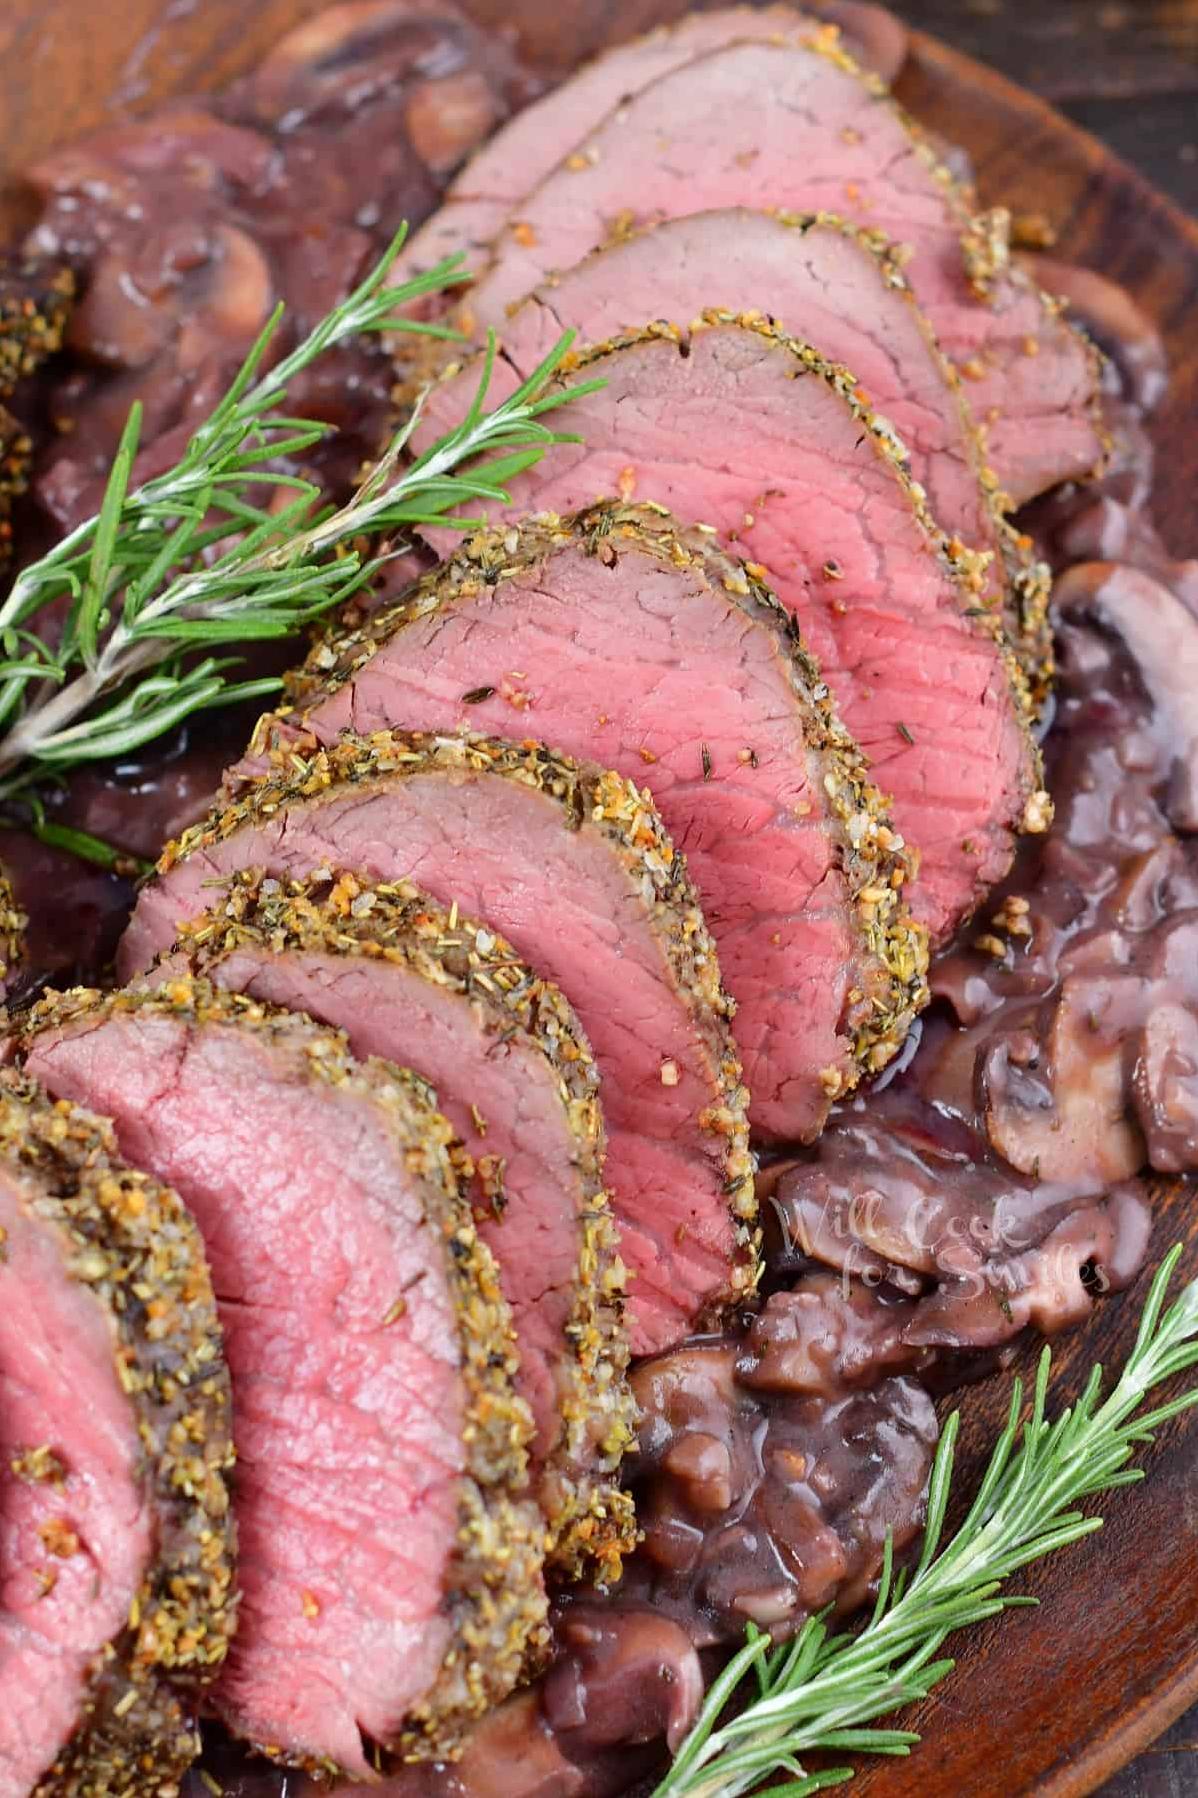 Beef Tenderloin With Mushrooms, Onions and Reduced Wine Sauce